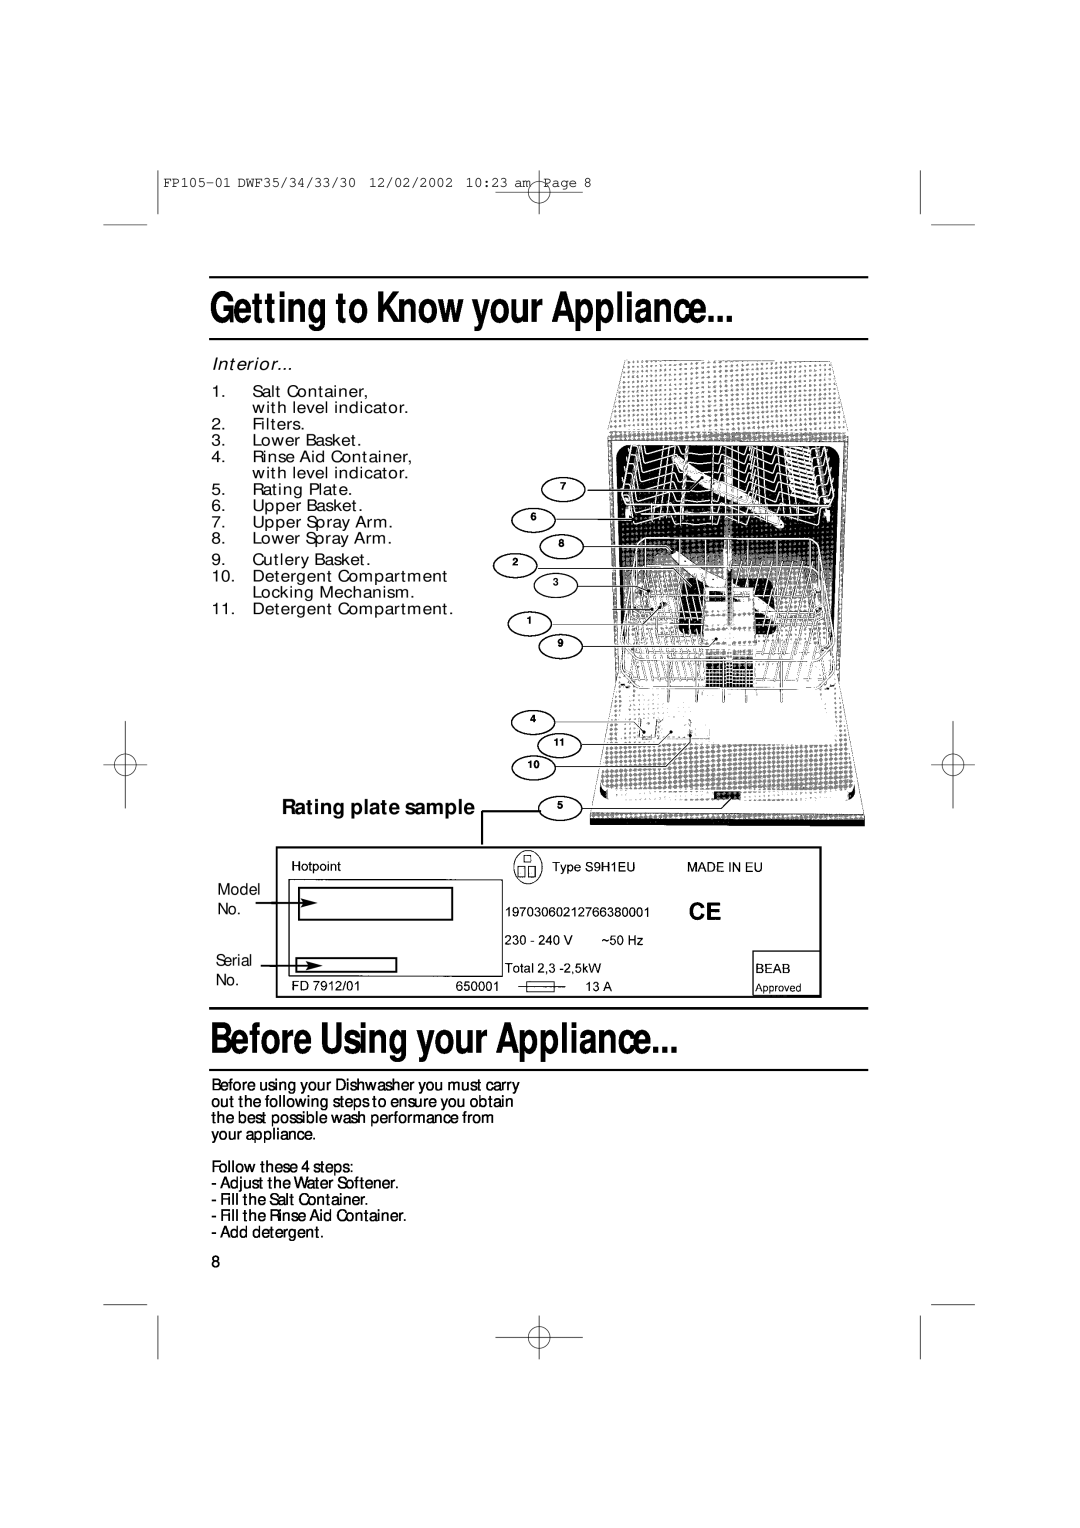 Hotpoint DWF35, DWF34, DWF30 Before Using your Appliance, Interior, Getting to Know your Appliance, Rating plate sample 